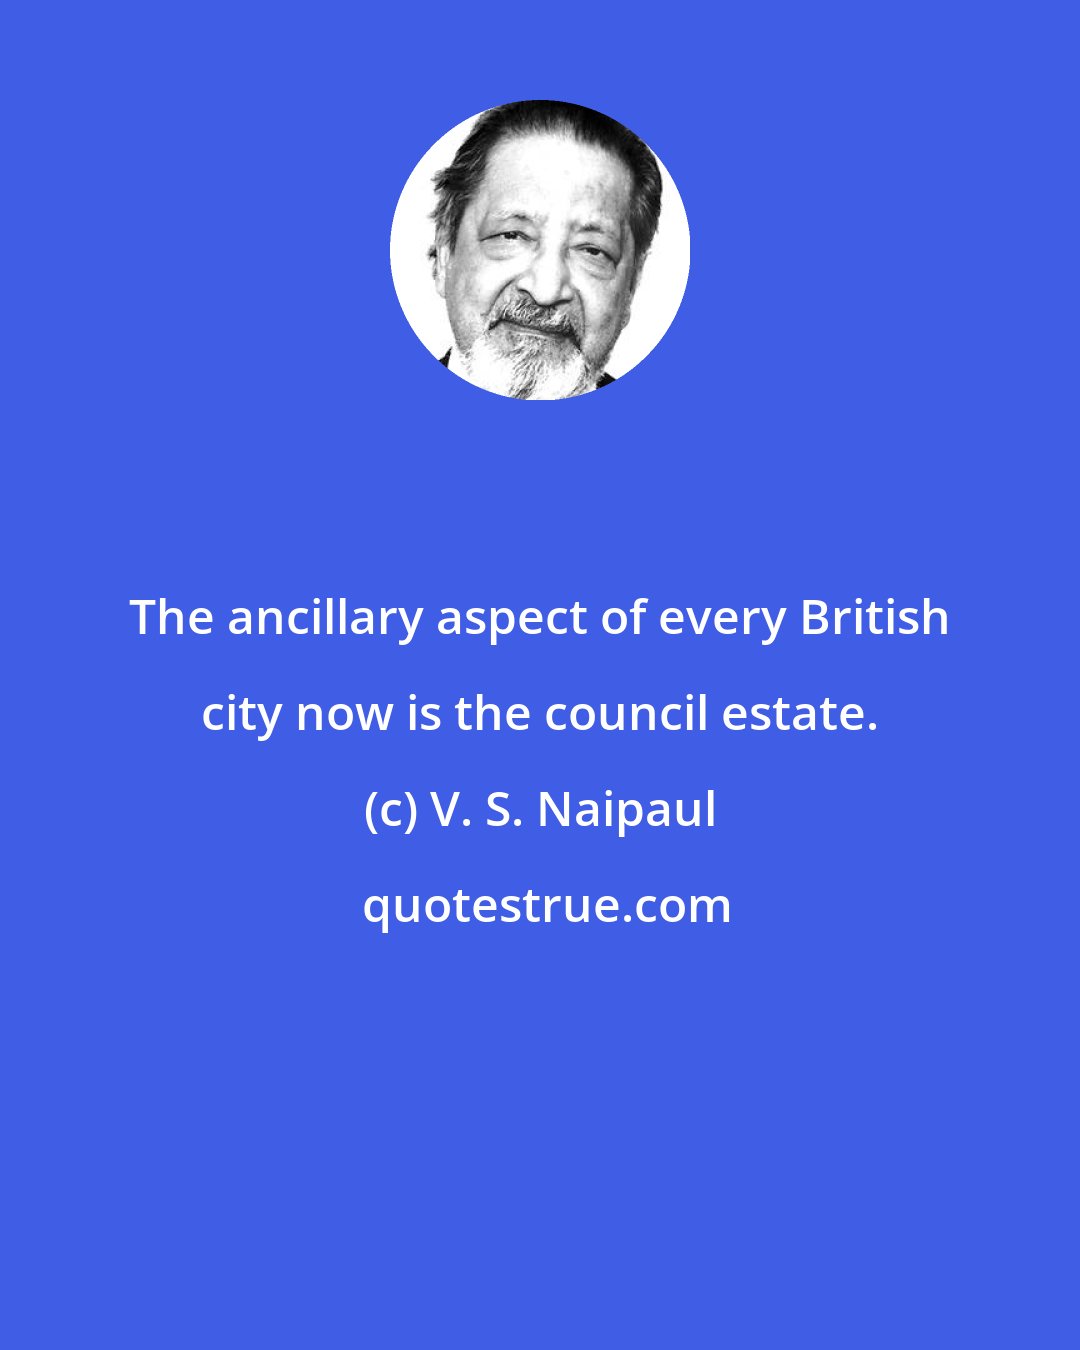 V. S. Naipaul: The ancillary aspect of every British city now is the council estate.